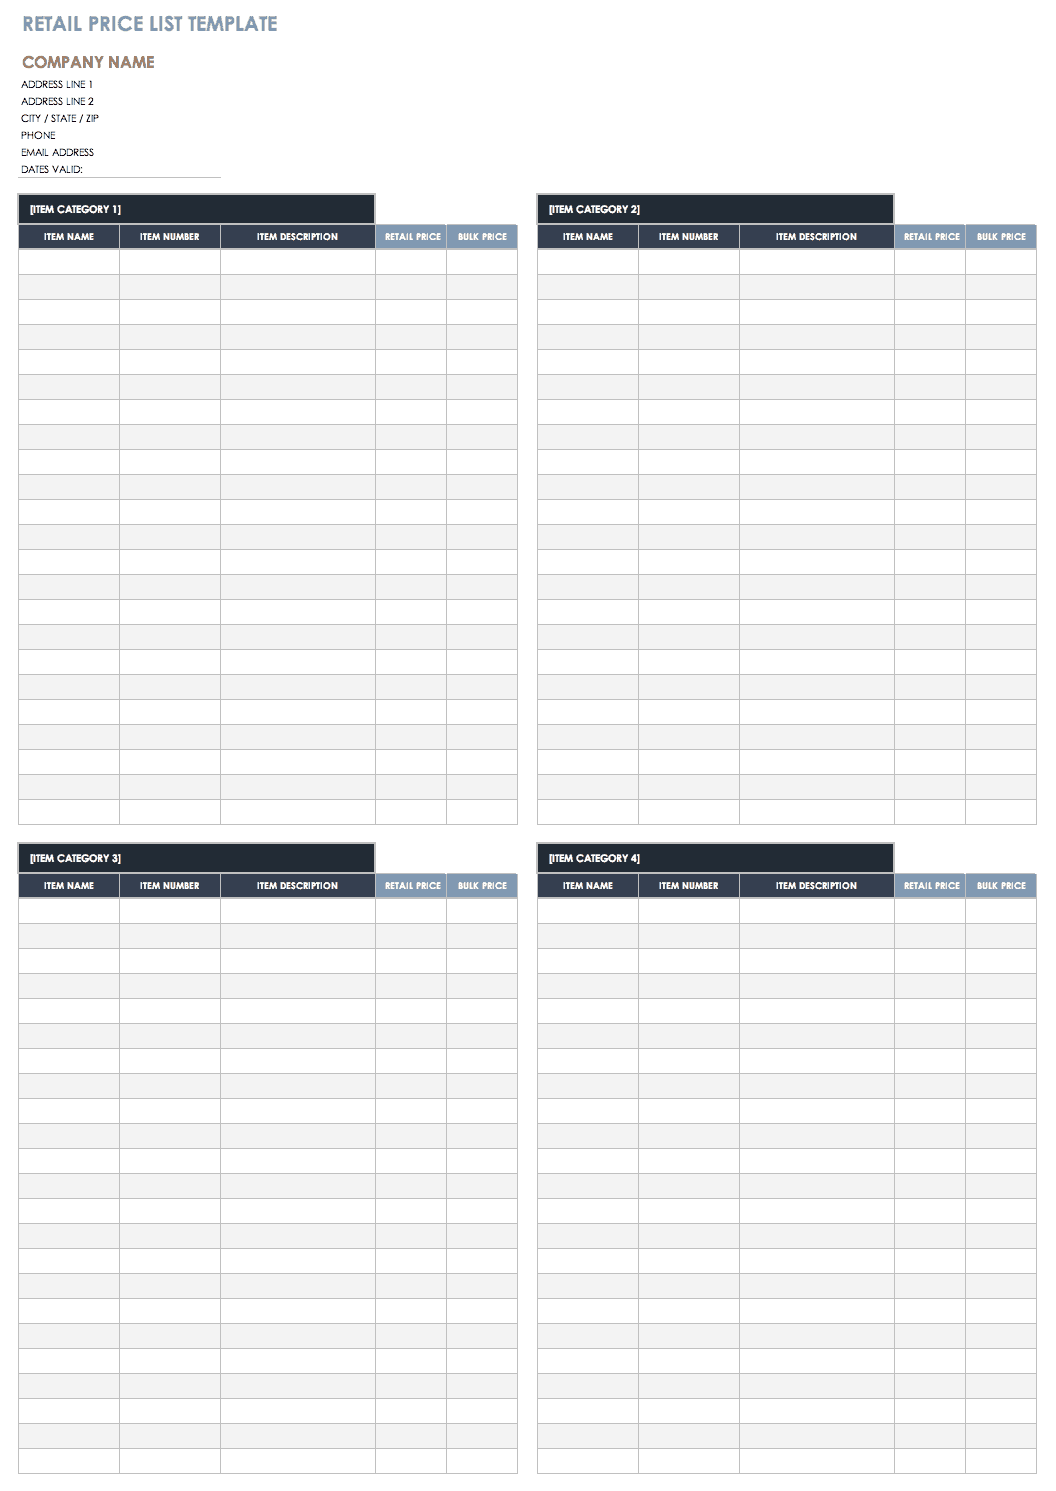 Pricing List Template from www.smartsheet.com